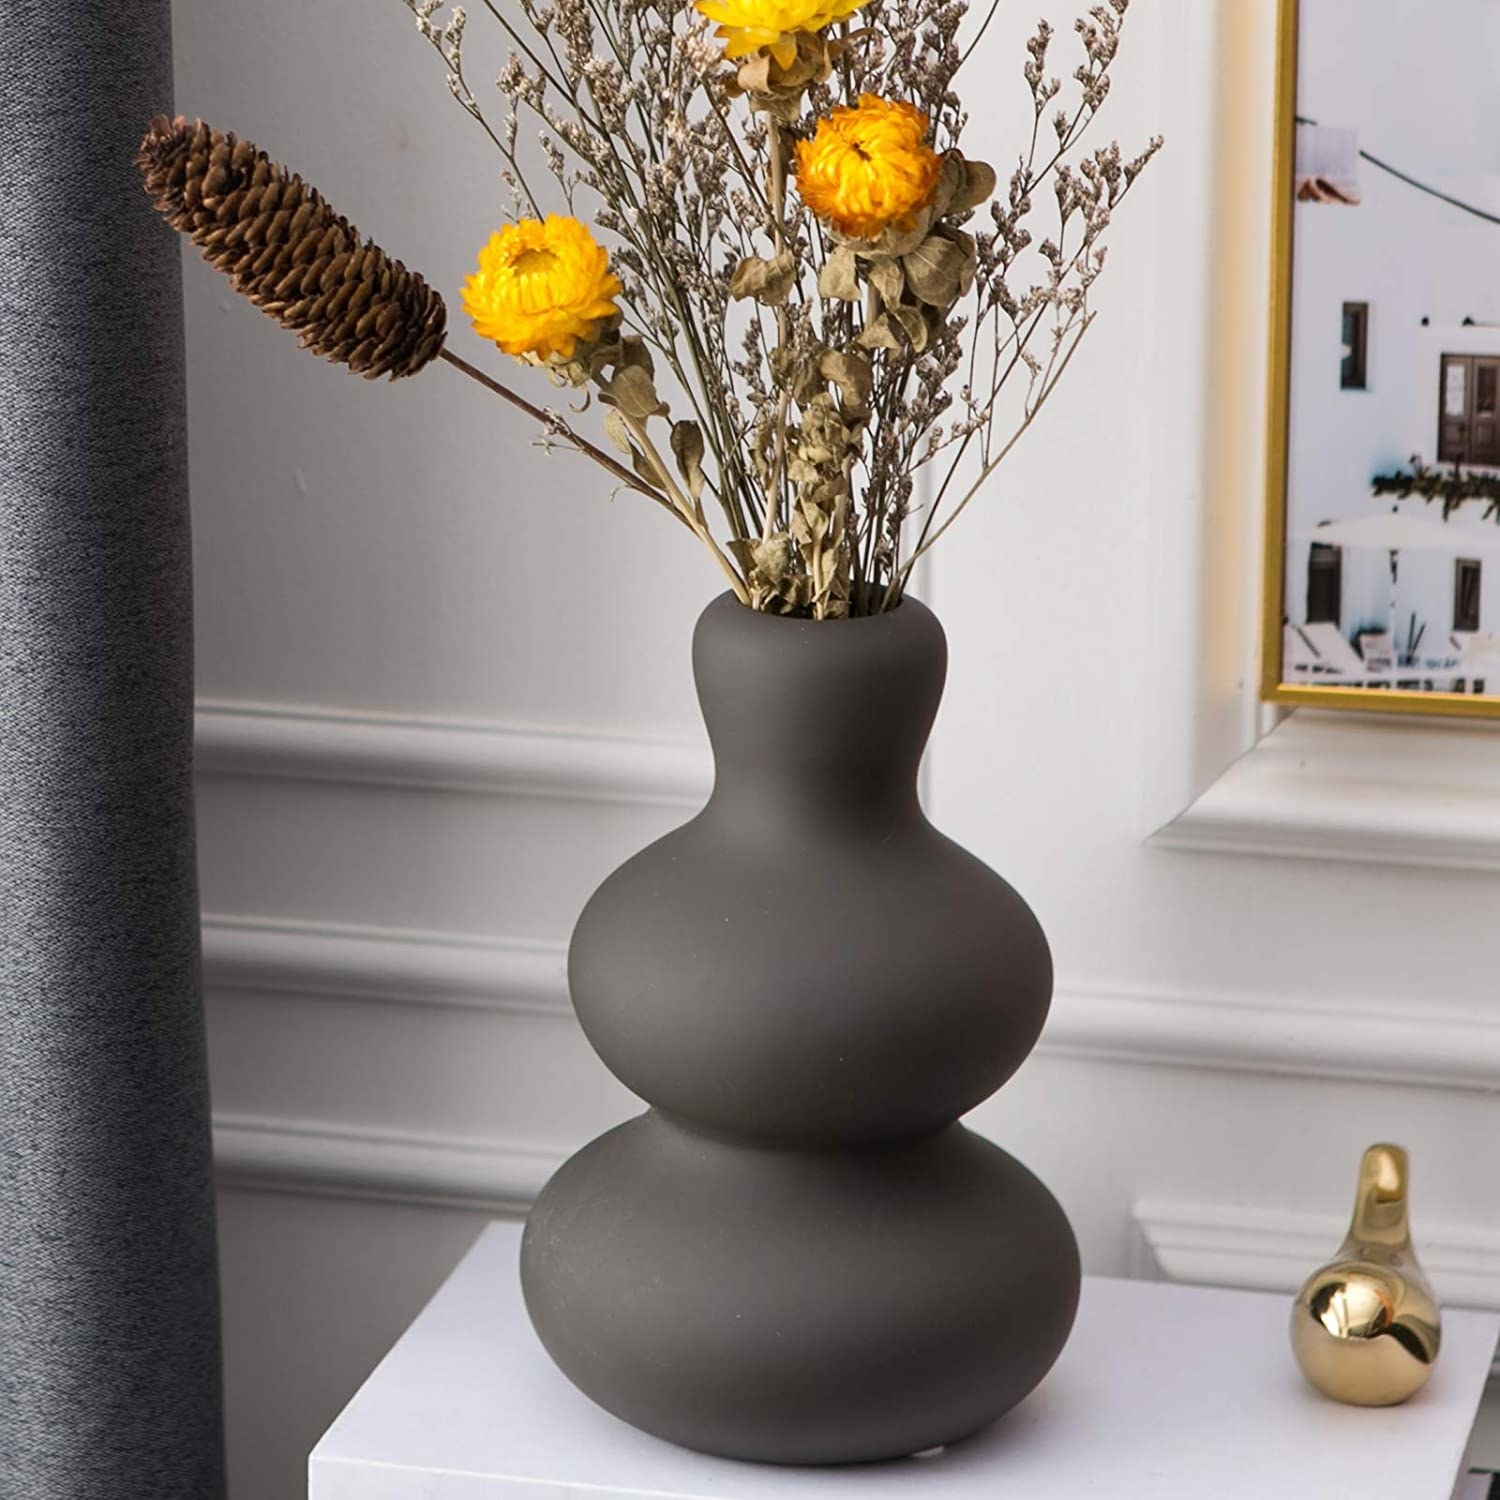 the brown ceramic vase with flowers in it